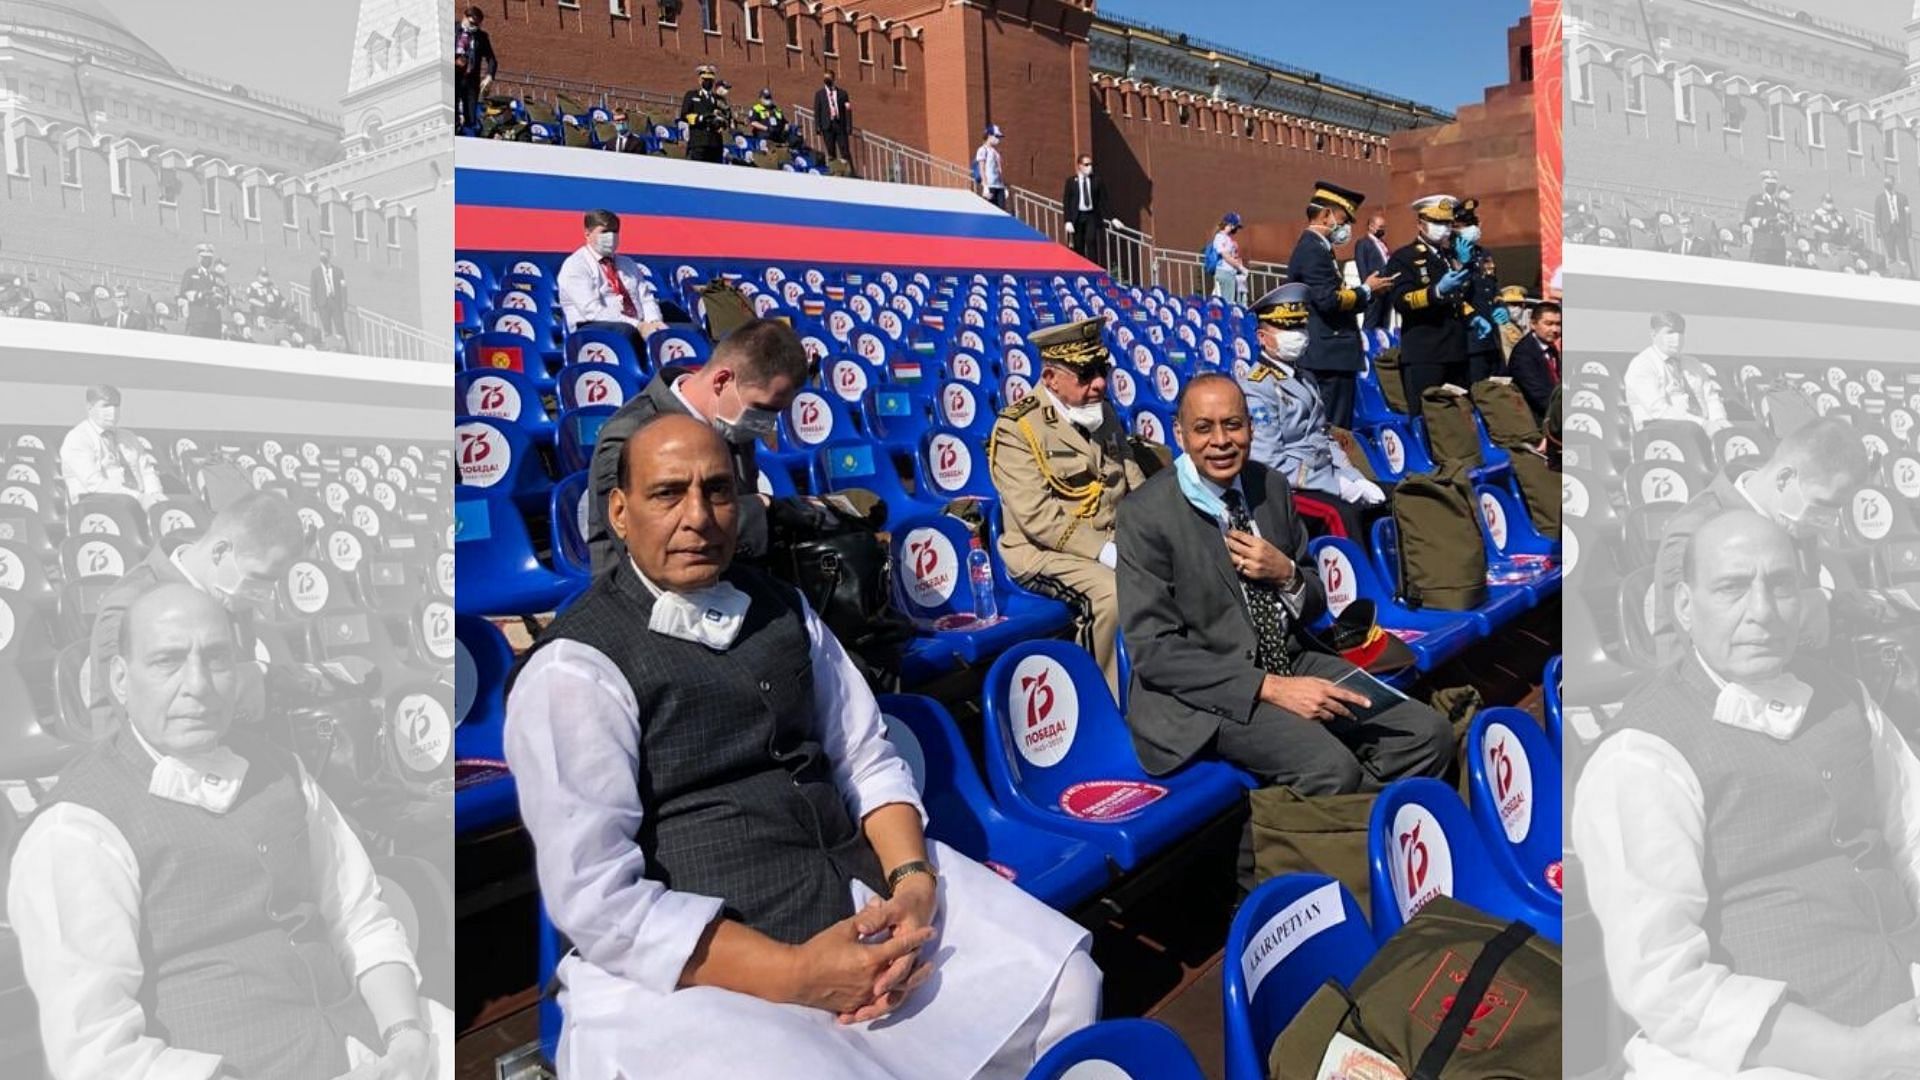 Defence Minister, Rajnath Singh, on Wednesday, 24 June attended the Victory Day Parade at Red Square in Moscow, Russia, to commemorate the 75th anniversary of the Soviet victory over Nazi Germany.